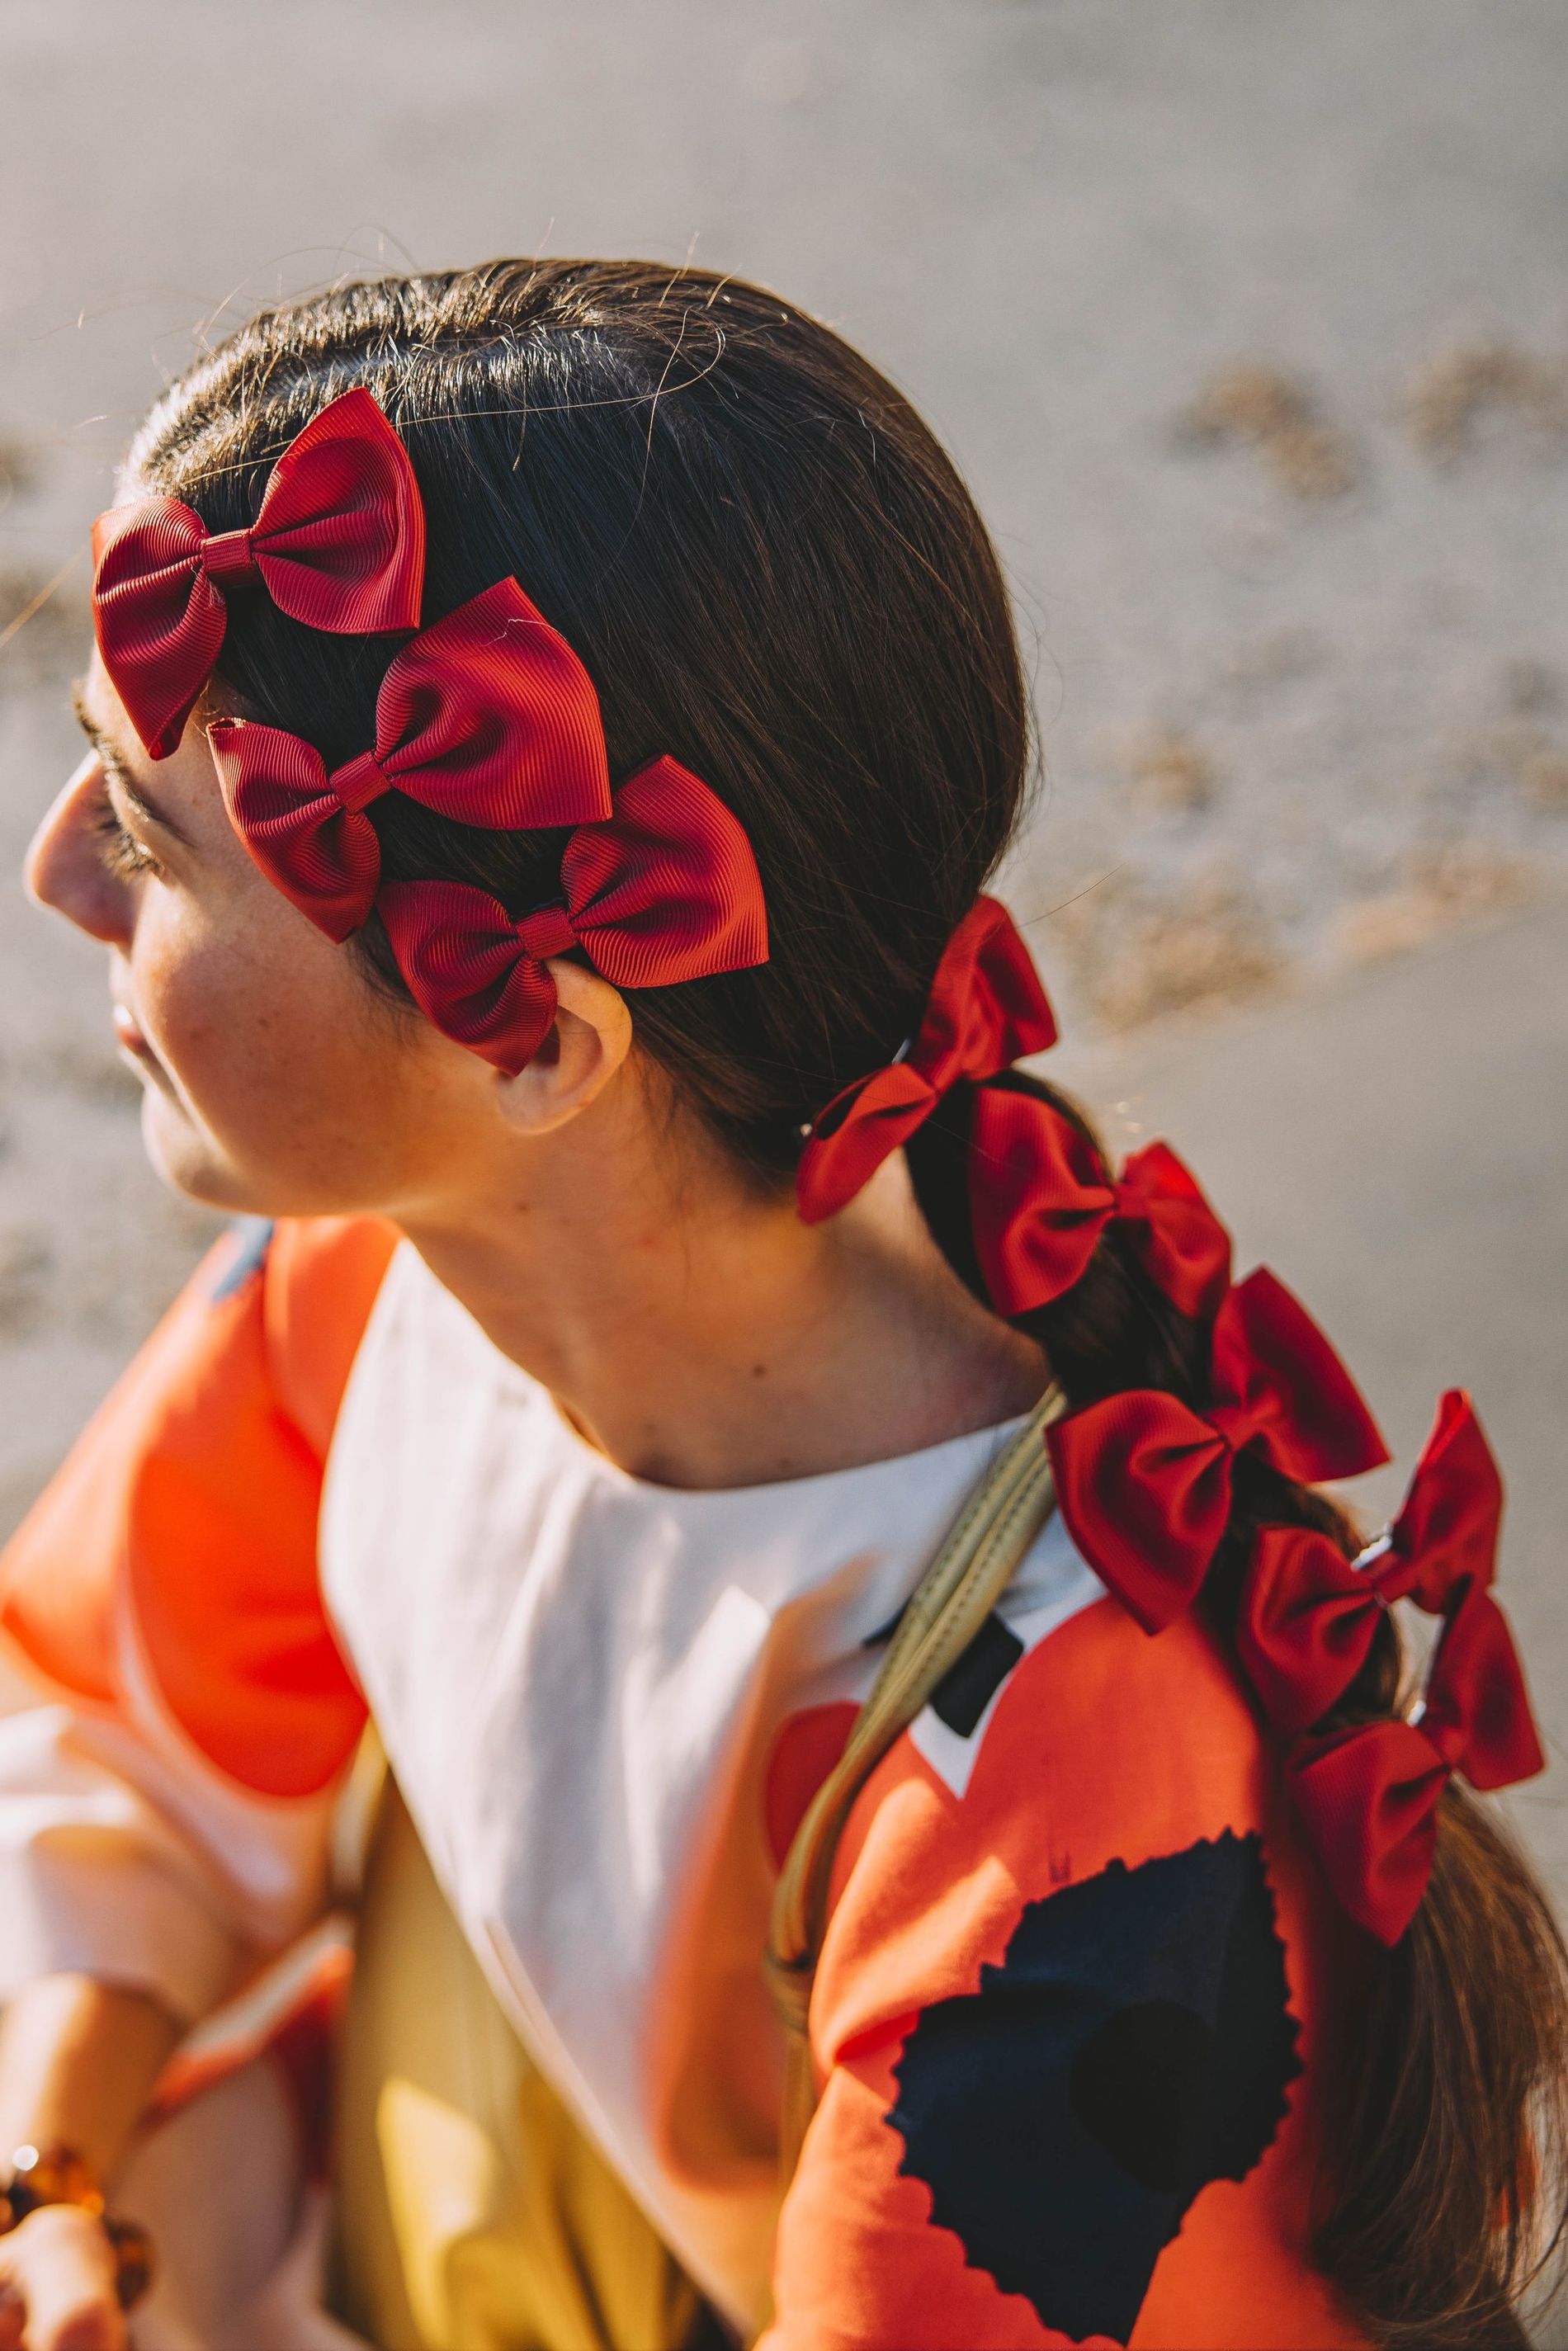 A guest at CPHFW poses for a street style photo wearing multiple bows in her hair